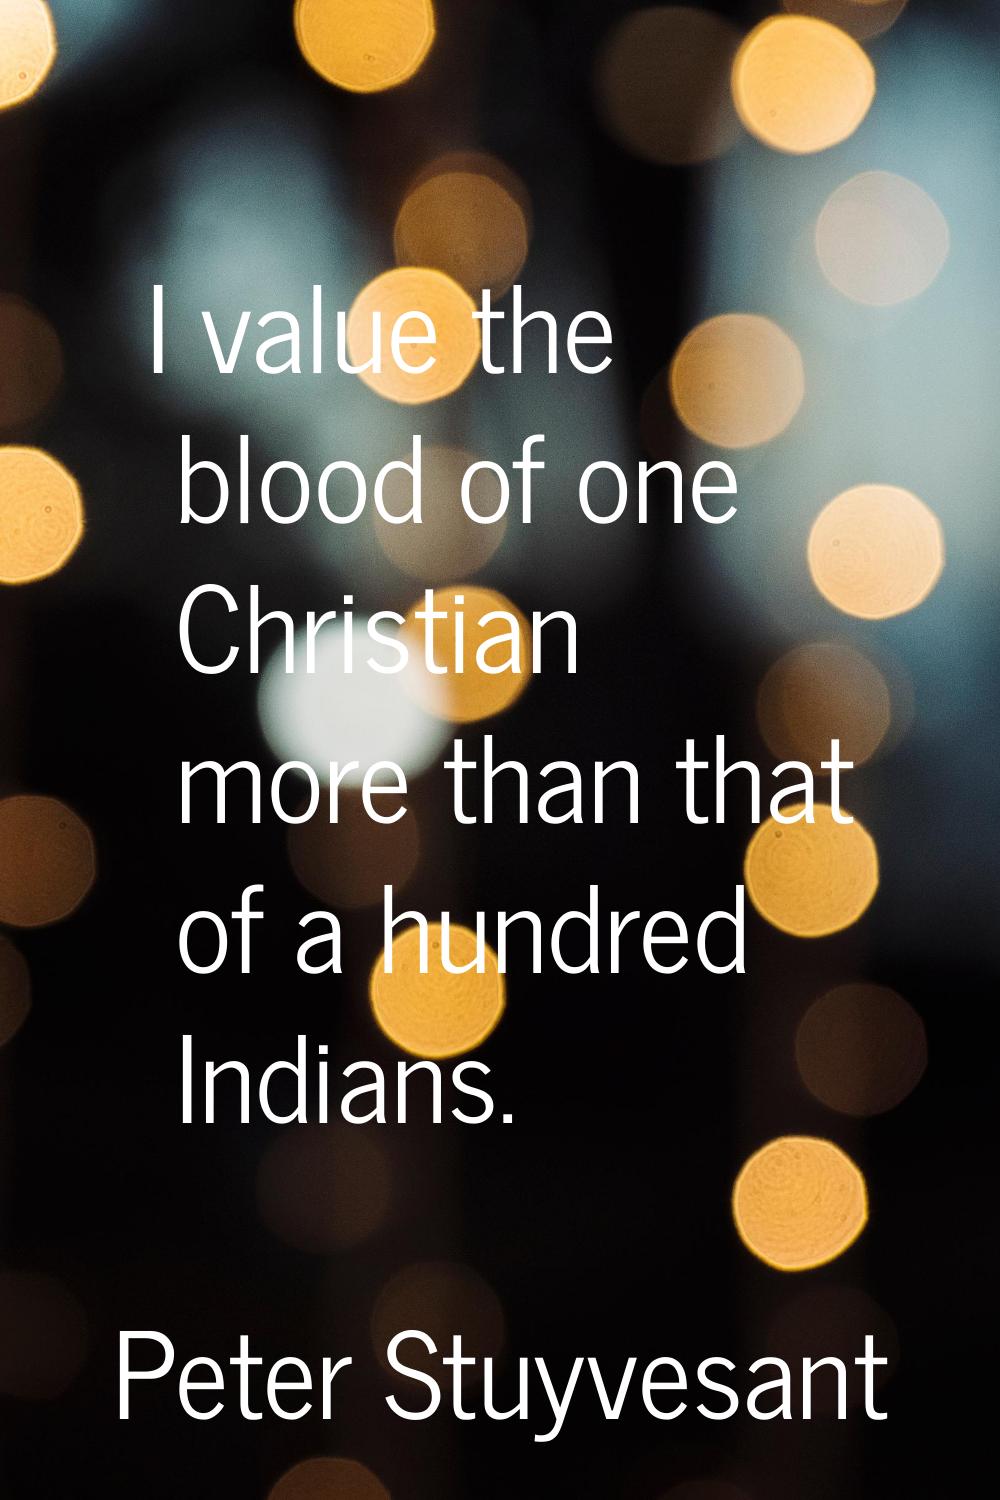 I value the blood of one Christian more than that of a hundred Indians.